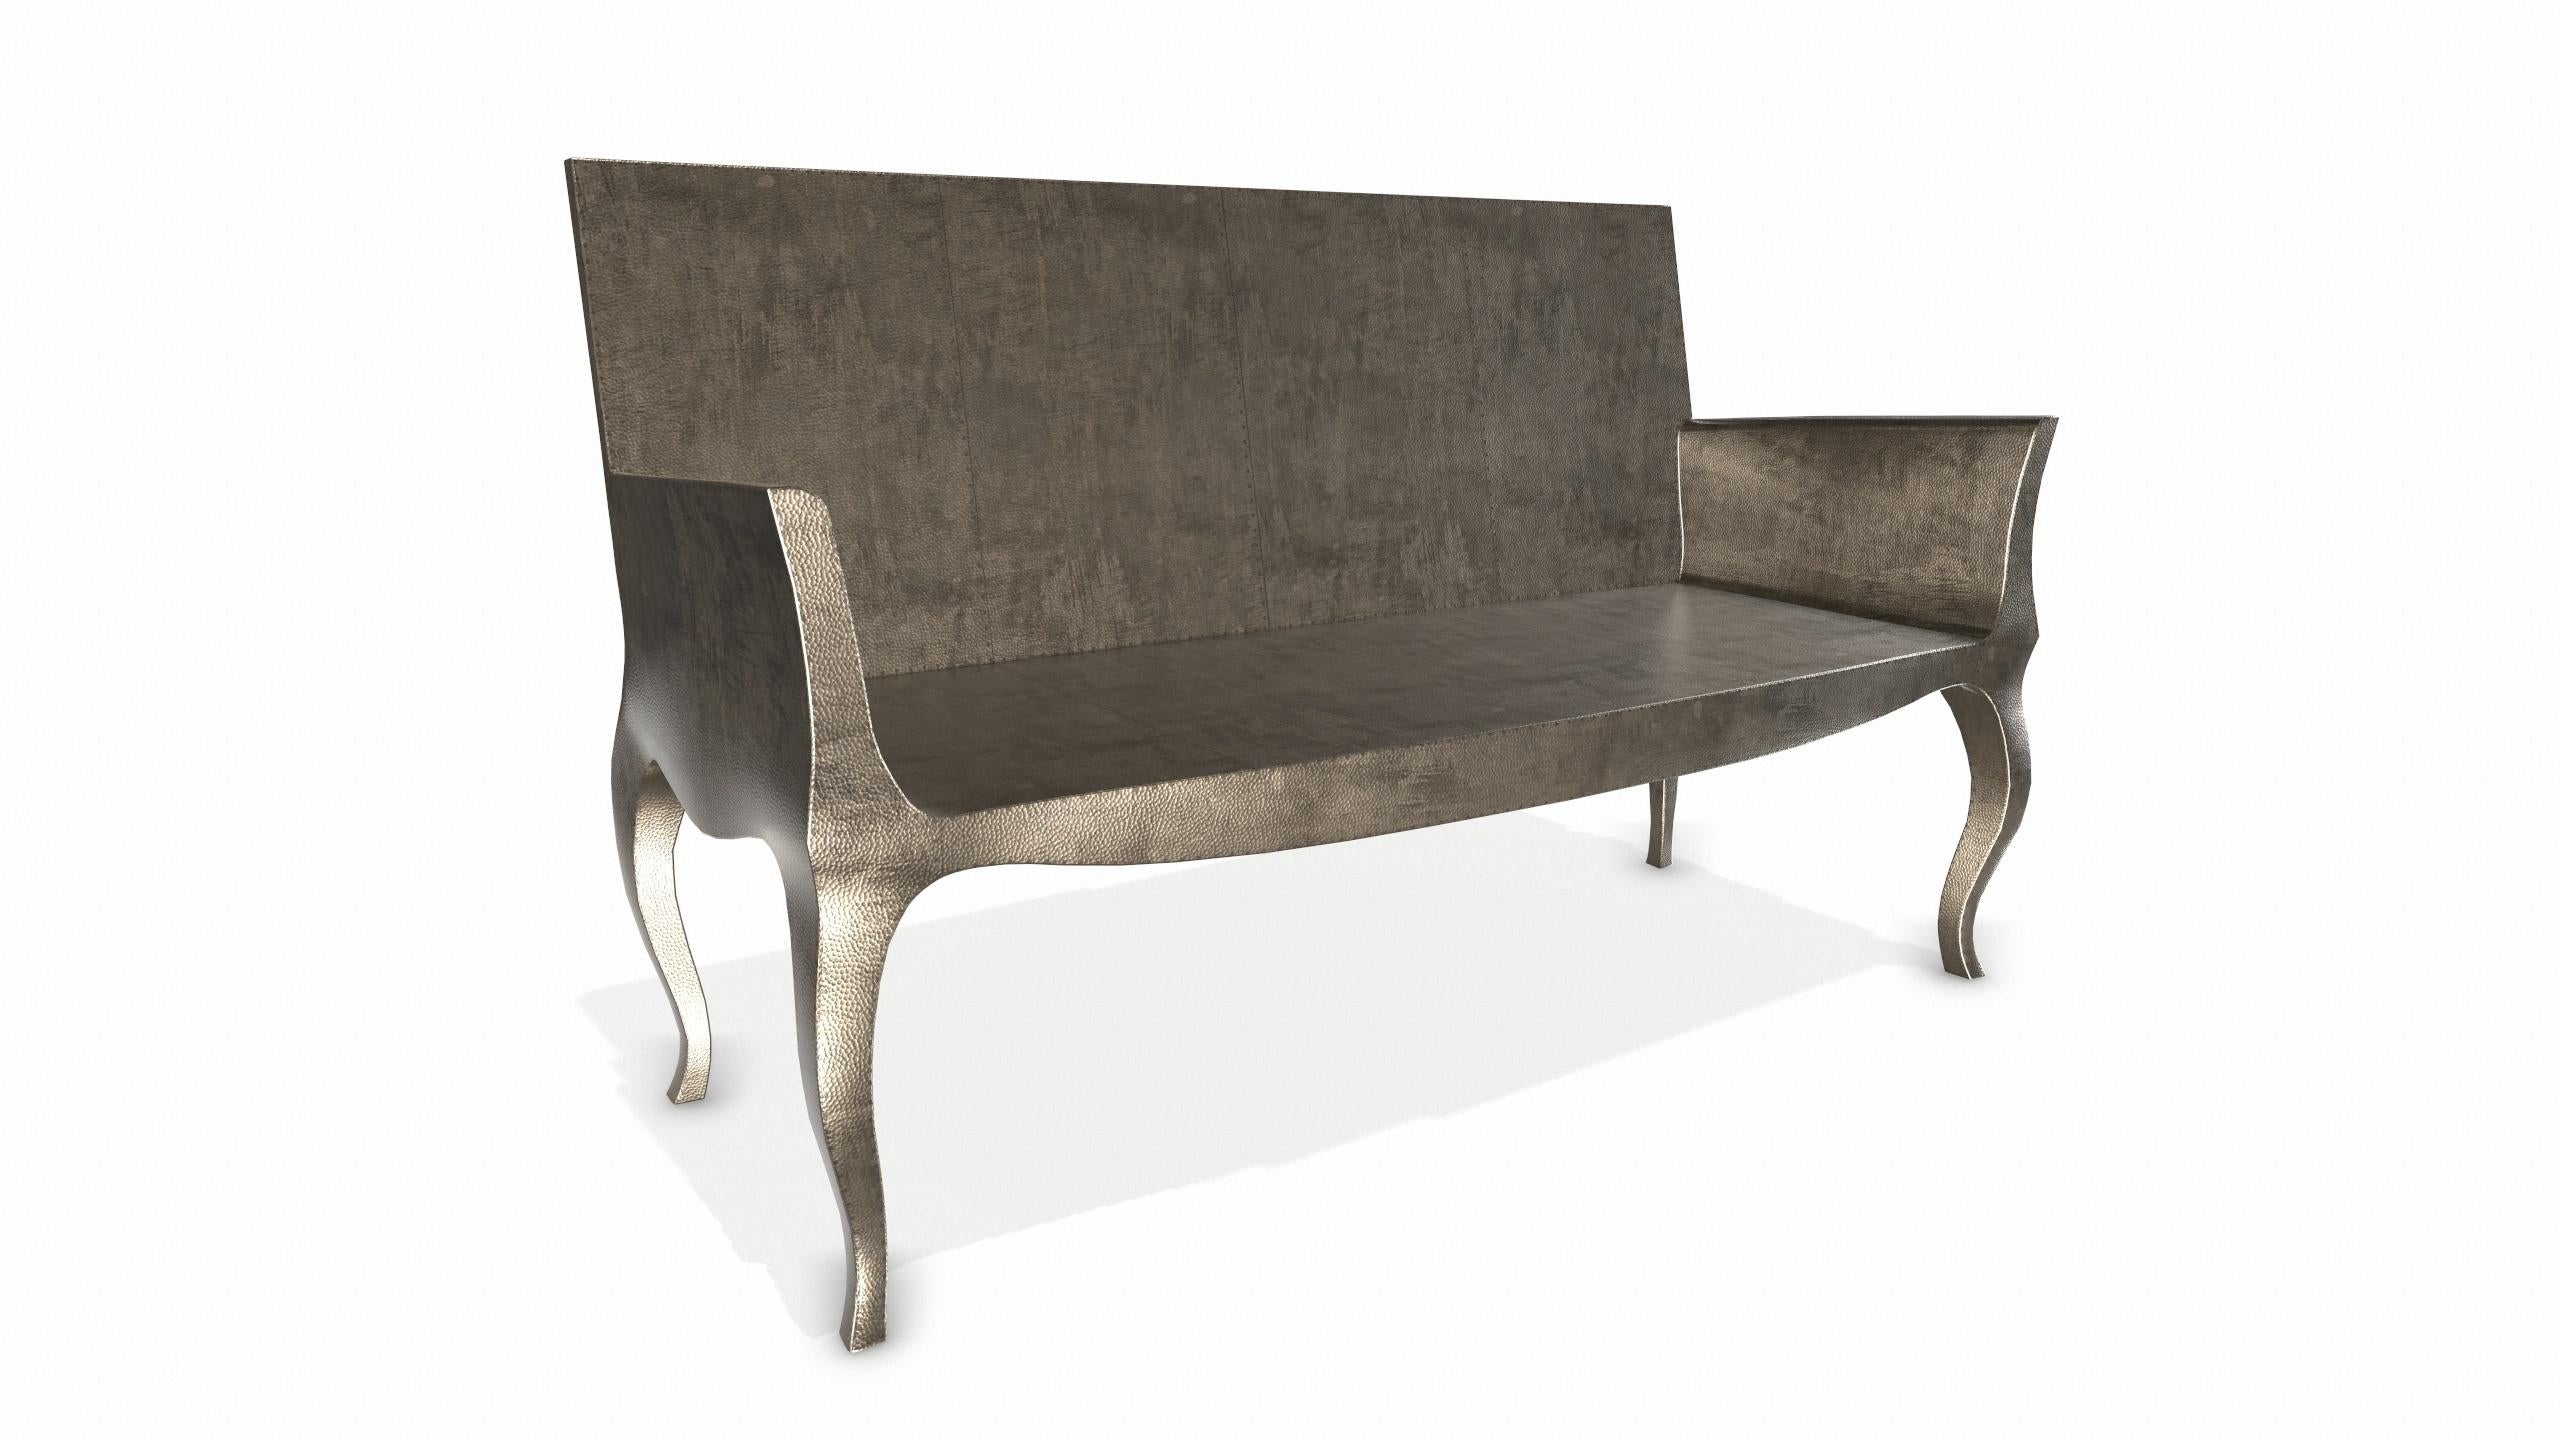 Contemporary Louise Settee Art Deco Benches in Mid. Hammered Antique Bronze by Paul Mathieu For Sale